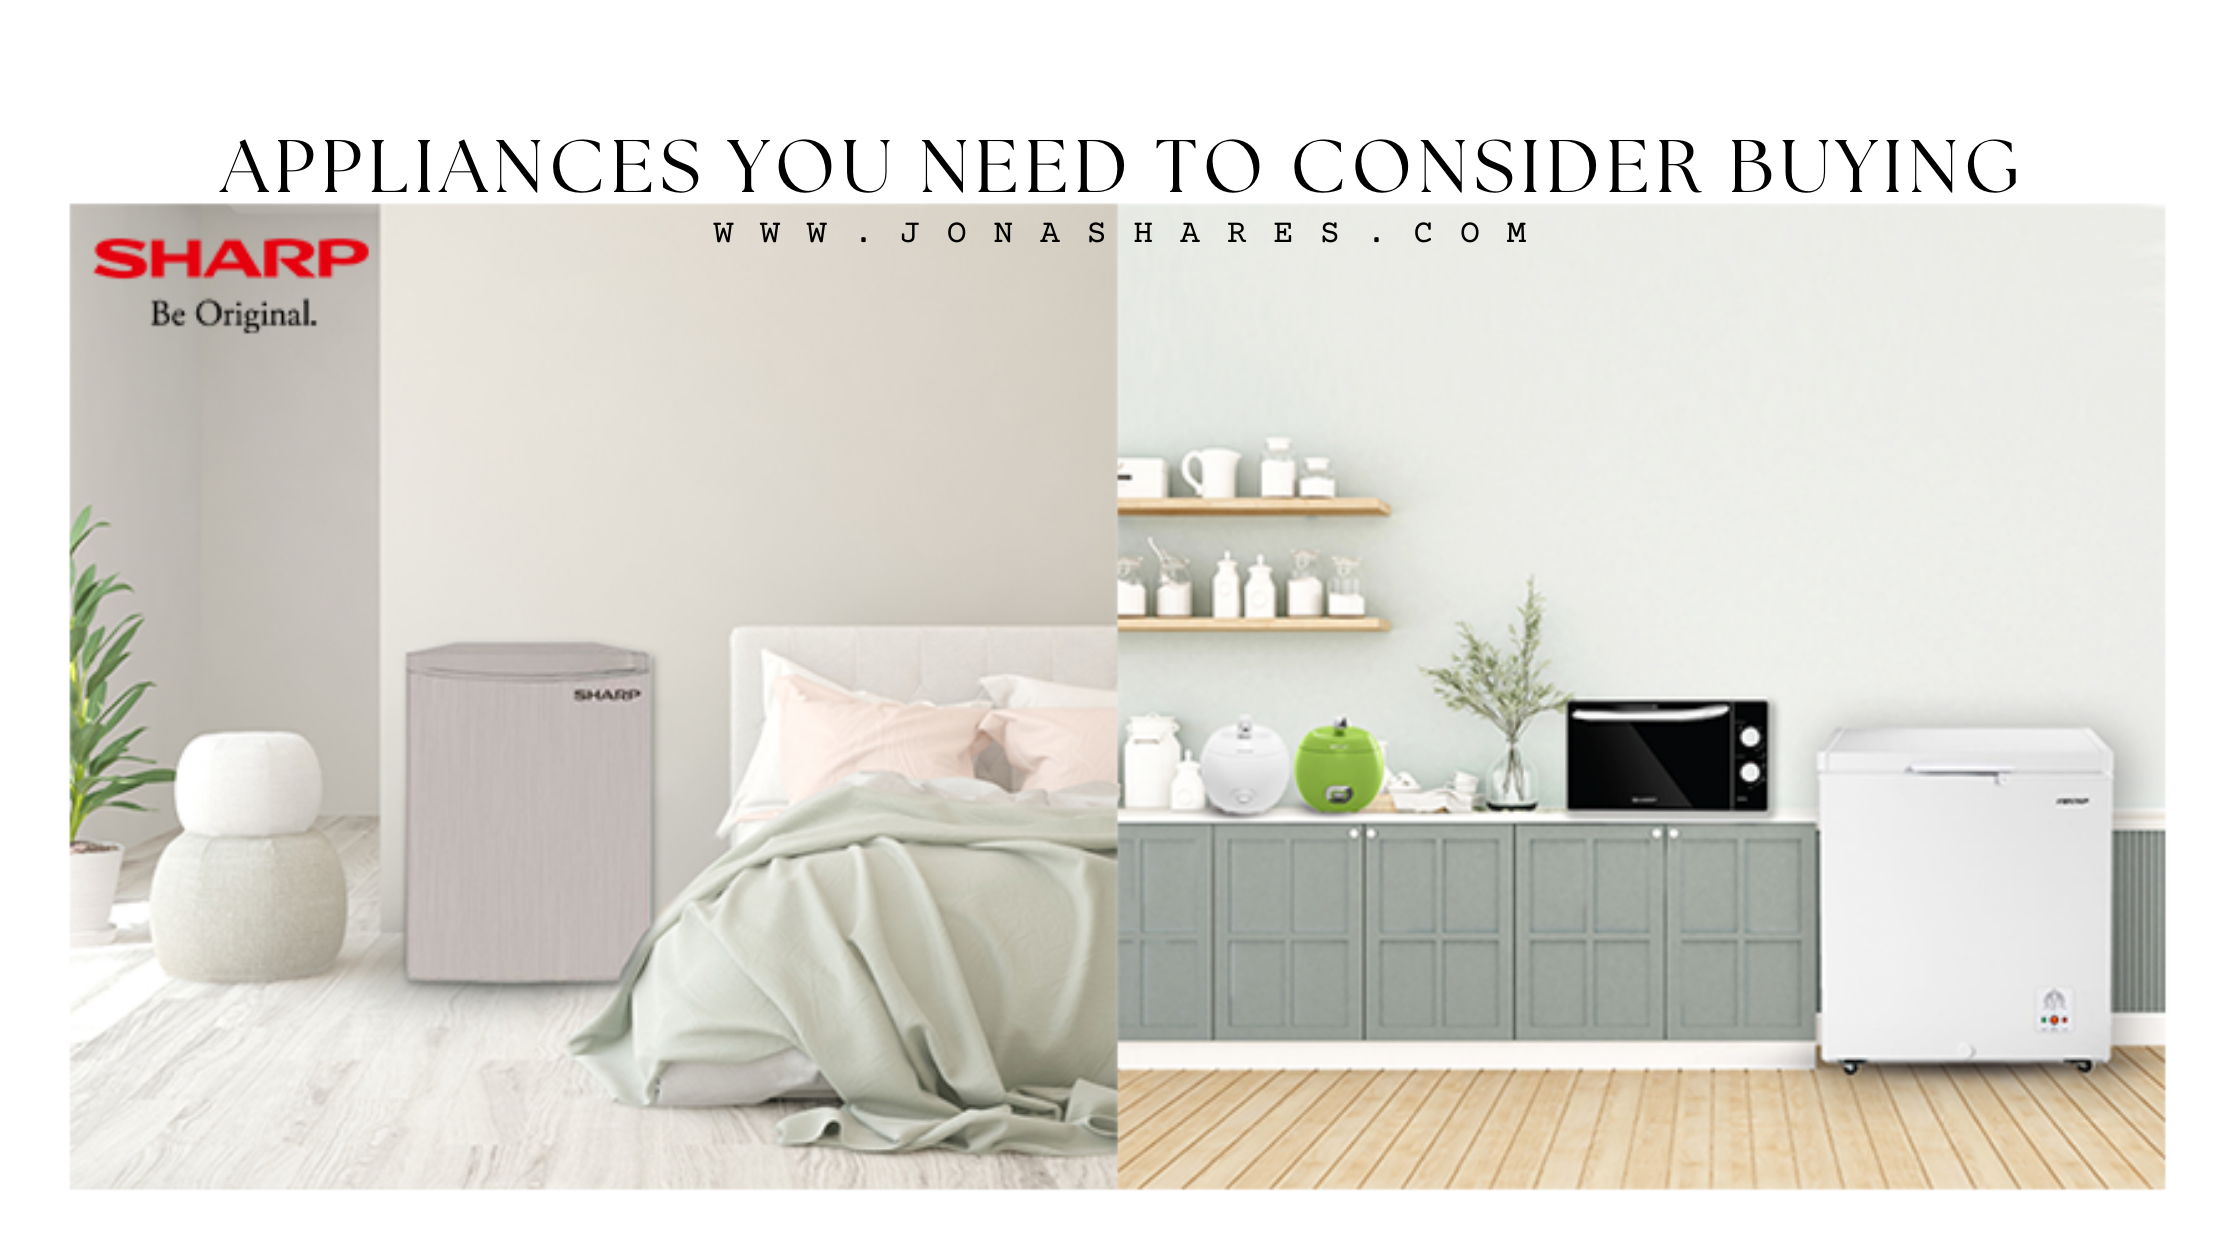 Lifestyle: Appliances you need to consider buying